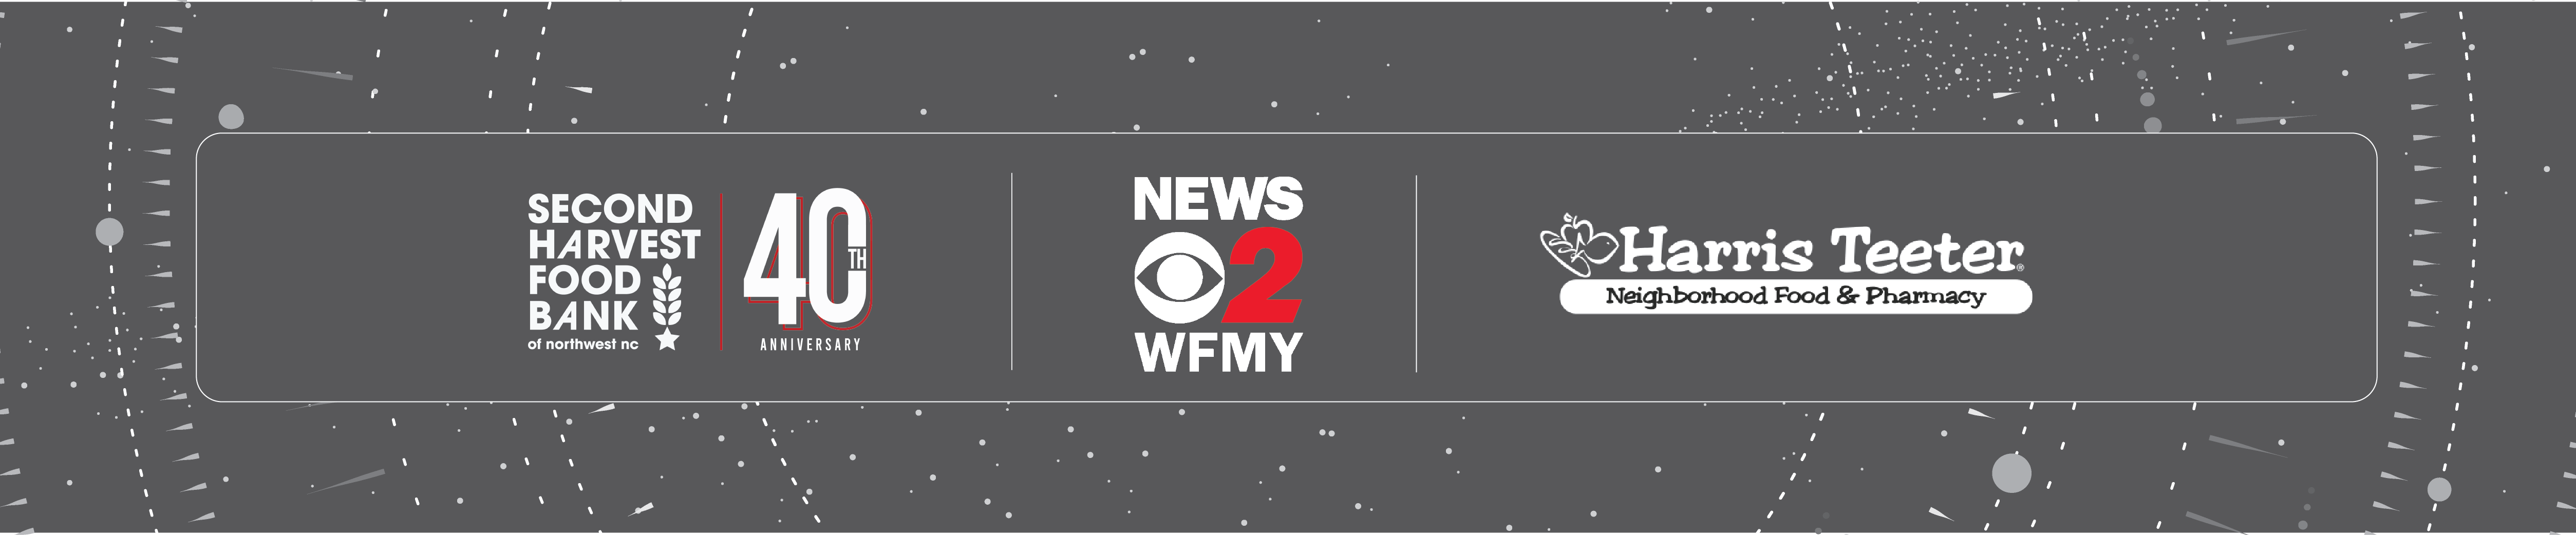 2's Day with News 2 WFMY